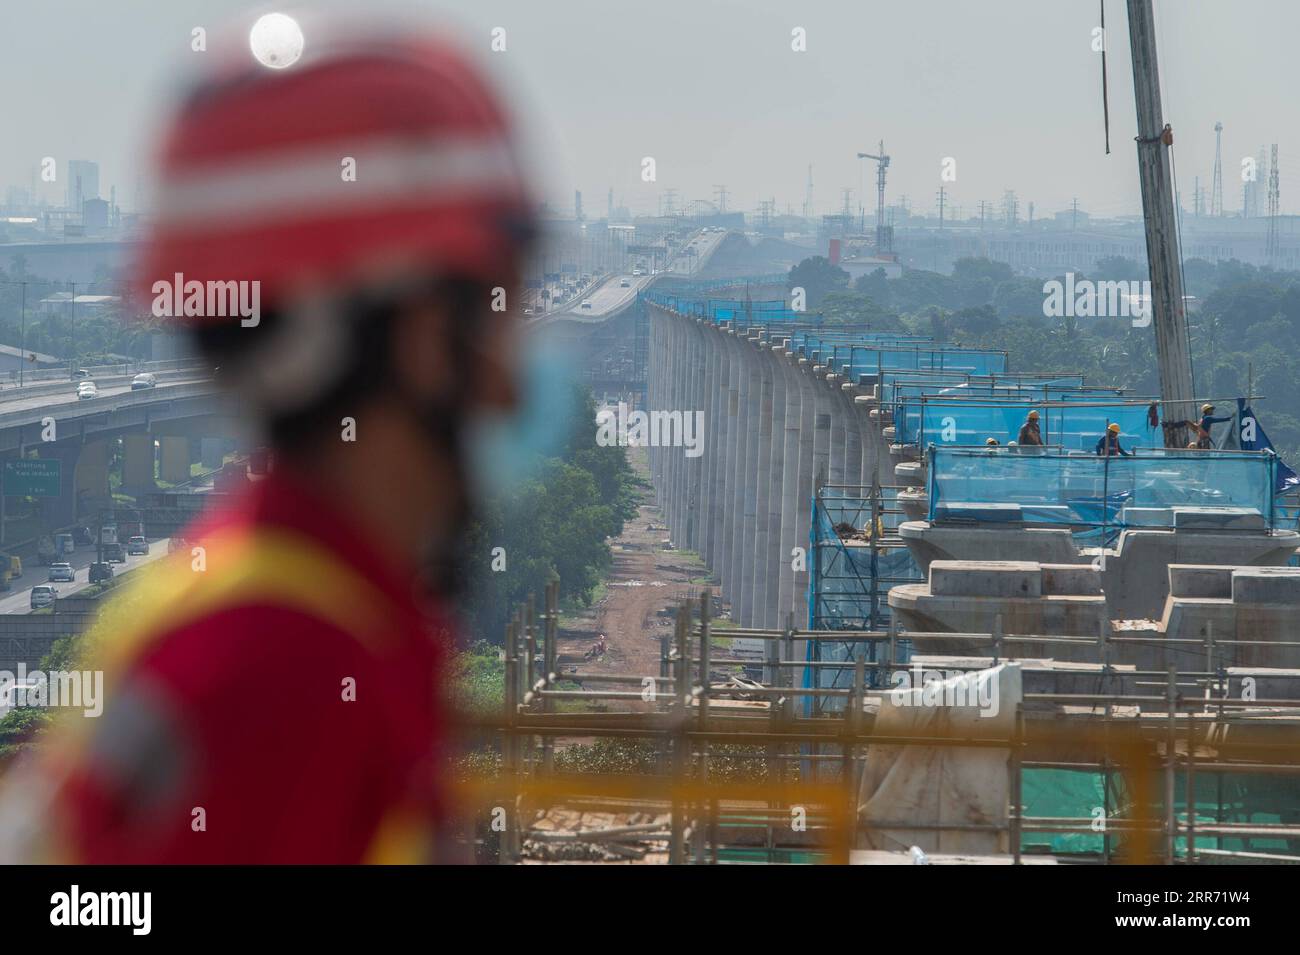 210308 -- JAKARTA, March 8, 2021 -- A worker stands on the largest span continuous beam of the Jakarta-Bandung High Speed Railway in Bekasi of Indonesia on March 8, 2021. The continuous beam with the largest span of Jakarta-Bandung High-Speed Railway HSR was successfully closed on Monday morning, marking the significant progress of another critical control project in the construction of the railway. A statement released by KCIC, a joint venture consortium by Chinese and Indonesian state-owned firms that runs the 142.3-km HSR, said the beam is closed in West Java province s Bekasi Regency and i Stock Photo